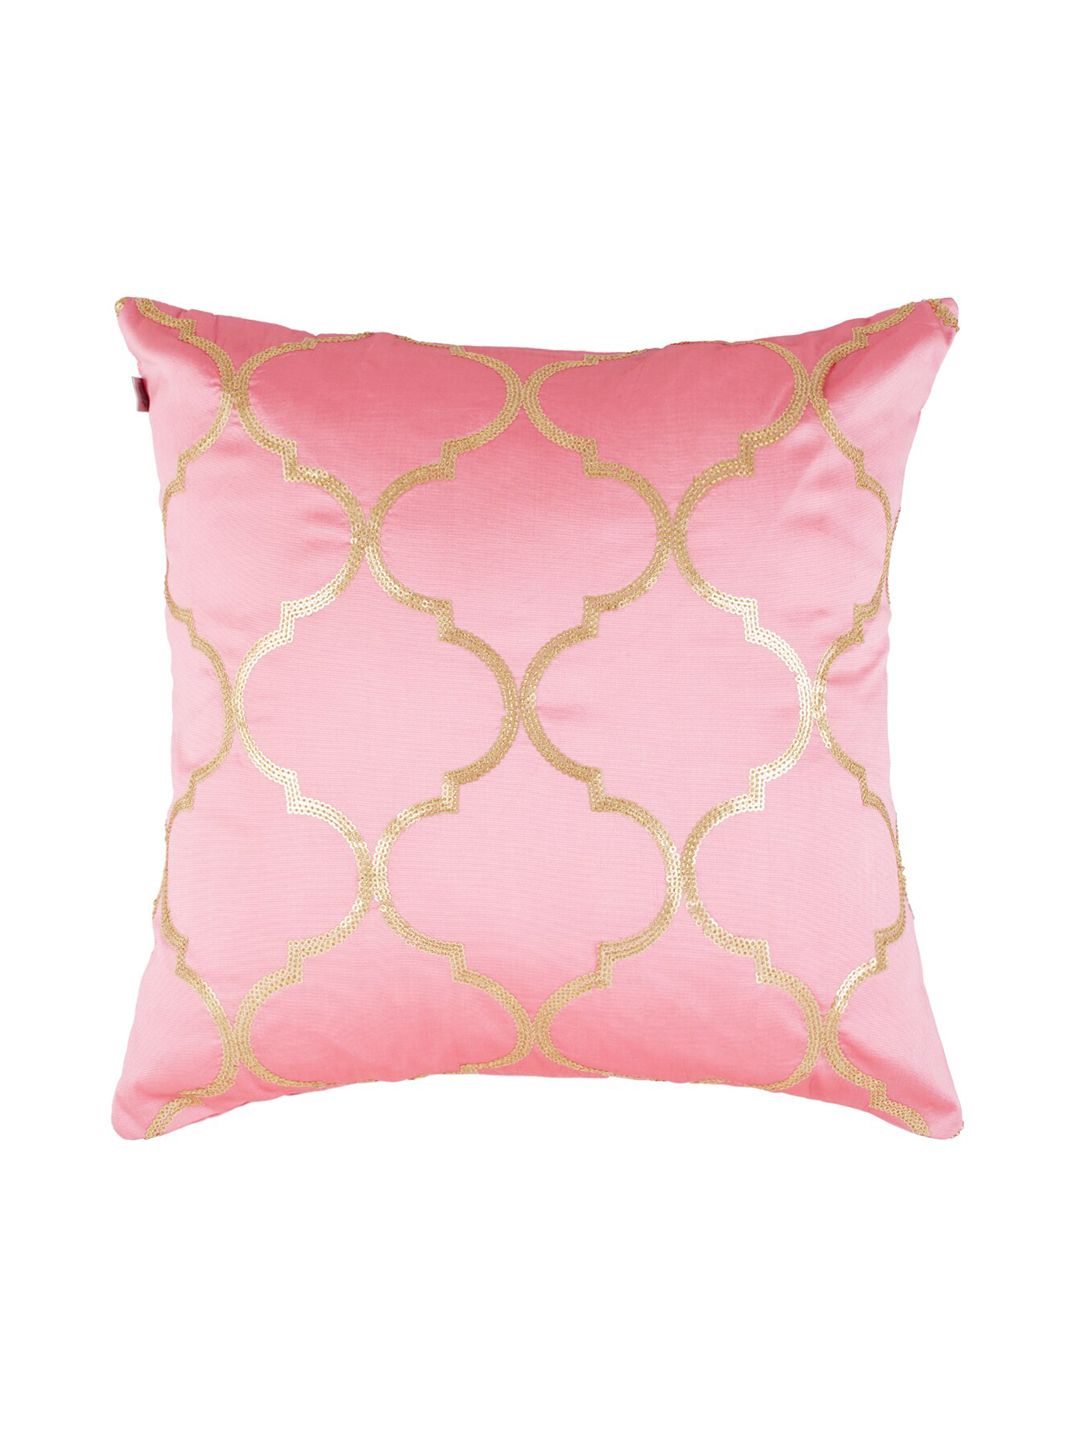 HomeTown Pink & Gold-Toned Embroidered Square Cushion Covers Price in India